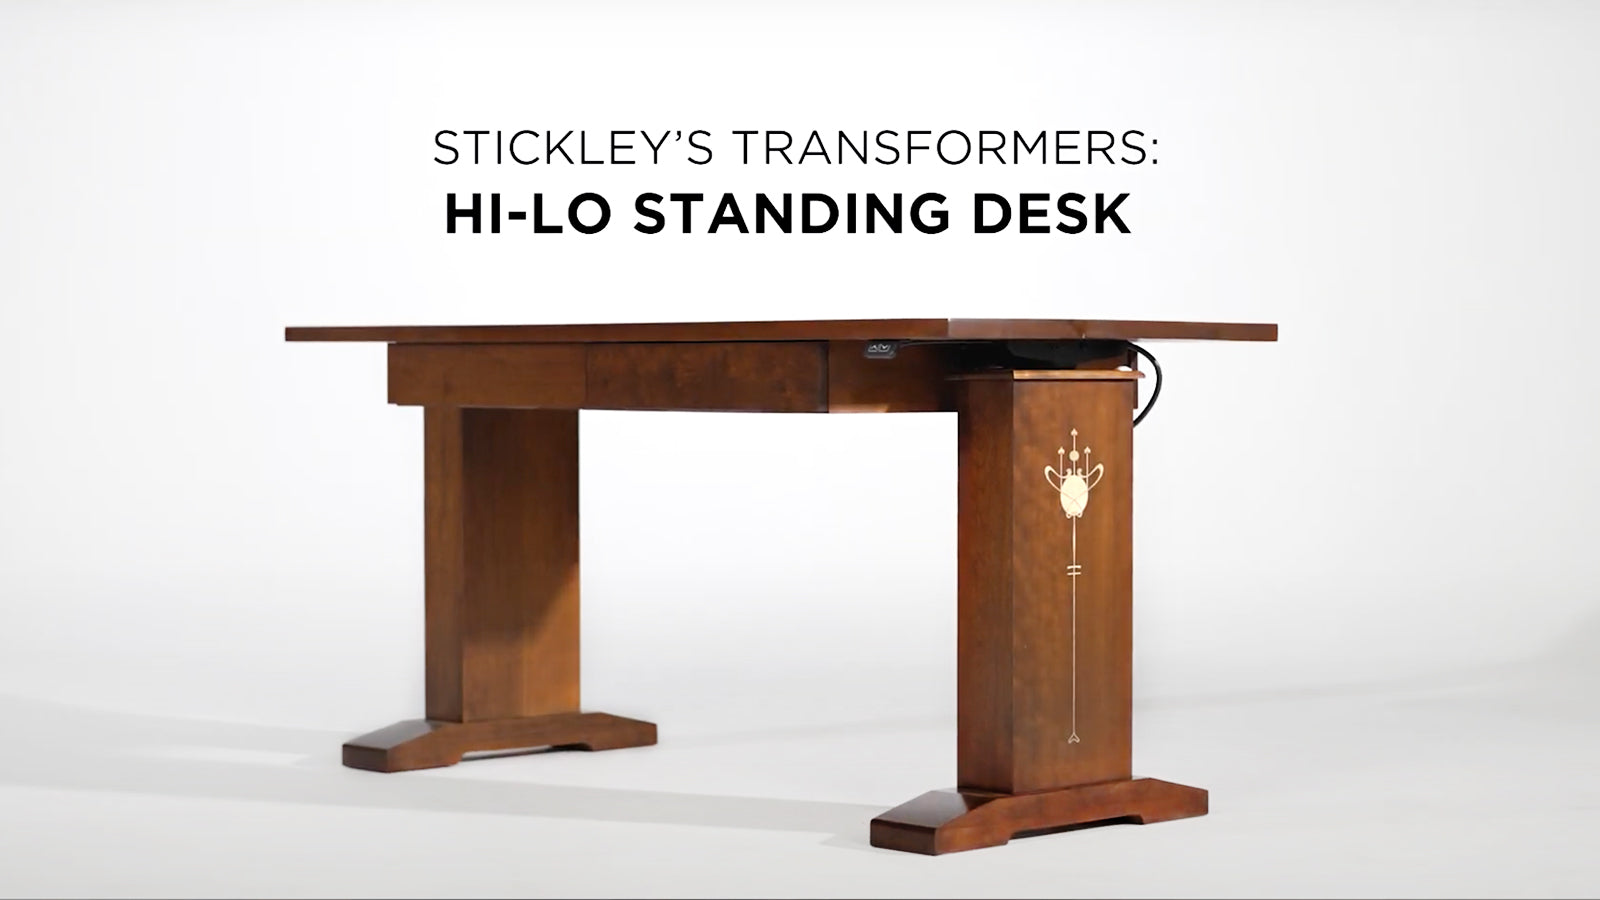 Still frame of a video showcasing the Hi-Lo standing desk against a white background with the words "Stickley's Transformers: Hi-Lo Standing Desk"